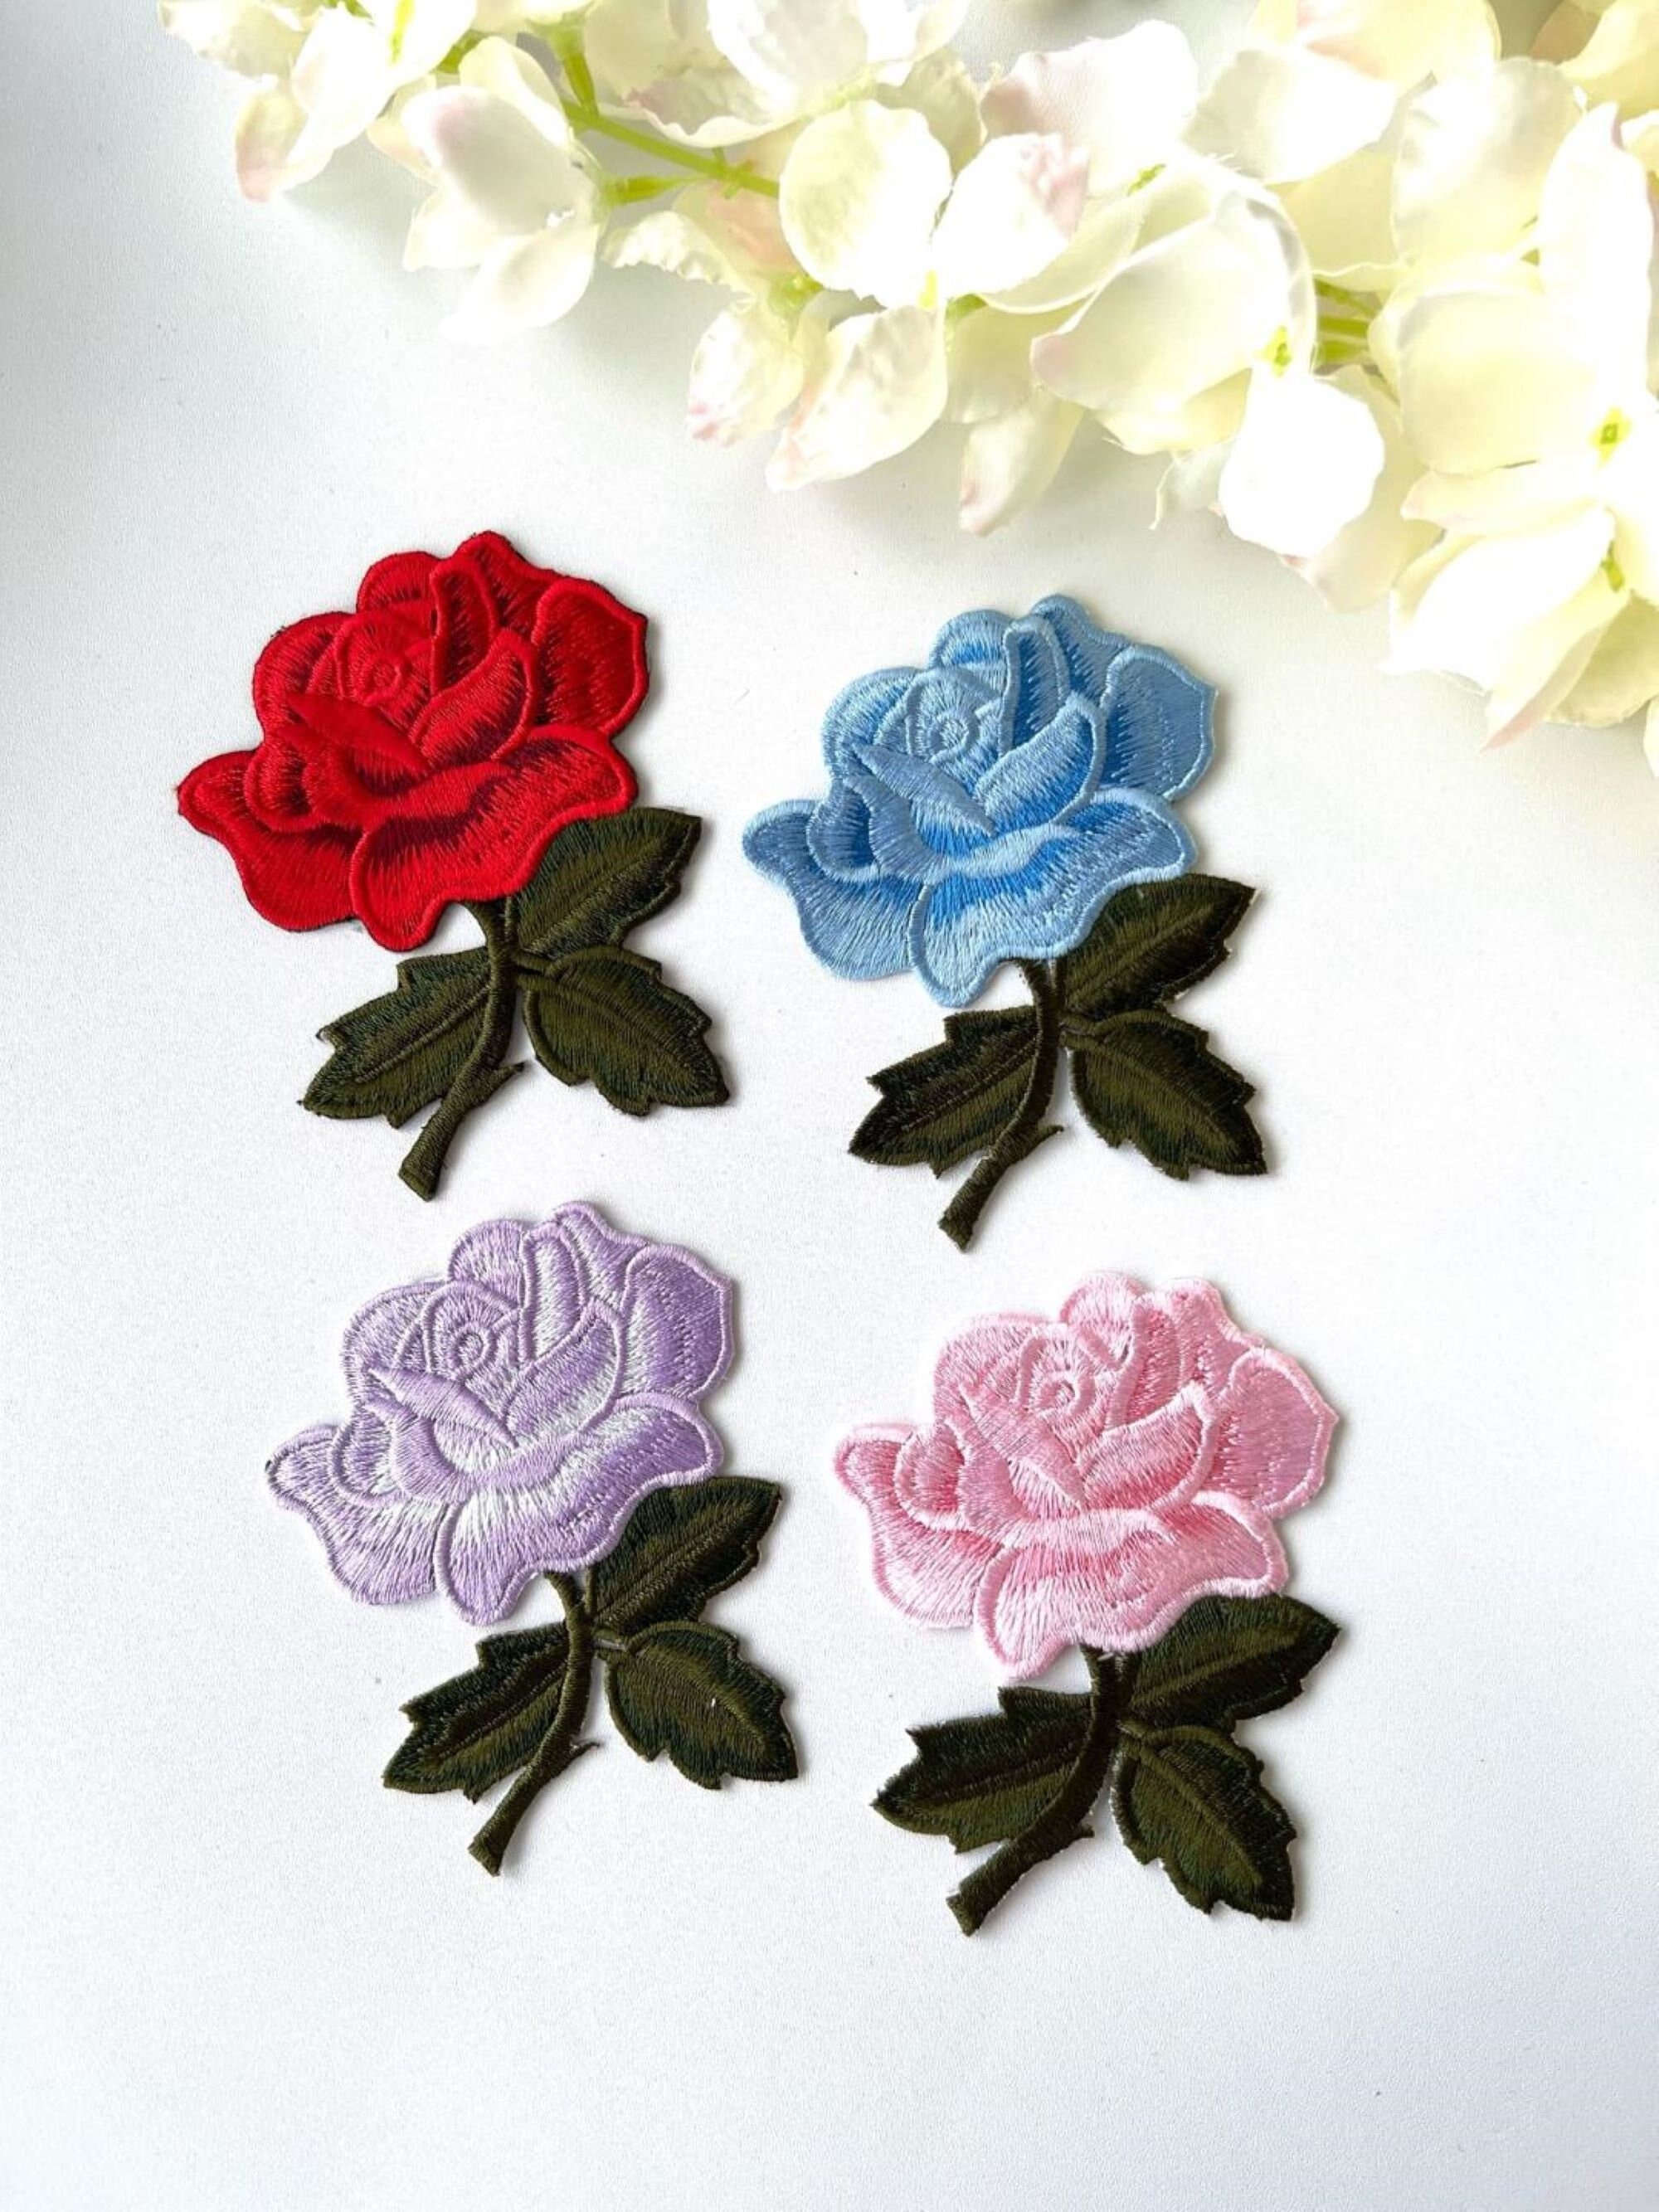  Wnvivi 2pcs Flower Patches,Blue Rose Pattern DIY Sewing  Embroidery Patch,Decorative Sew on Patches Applique for Cloth Bags Curtain  : Everything Else